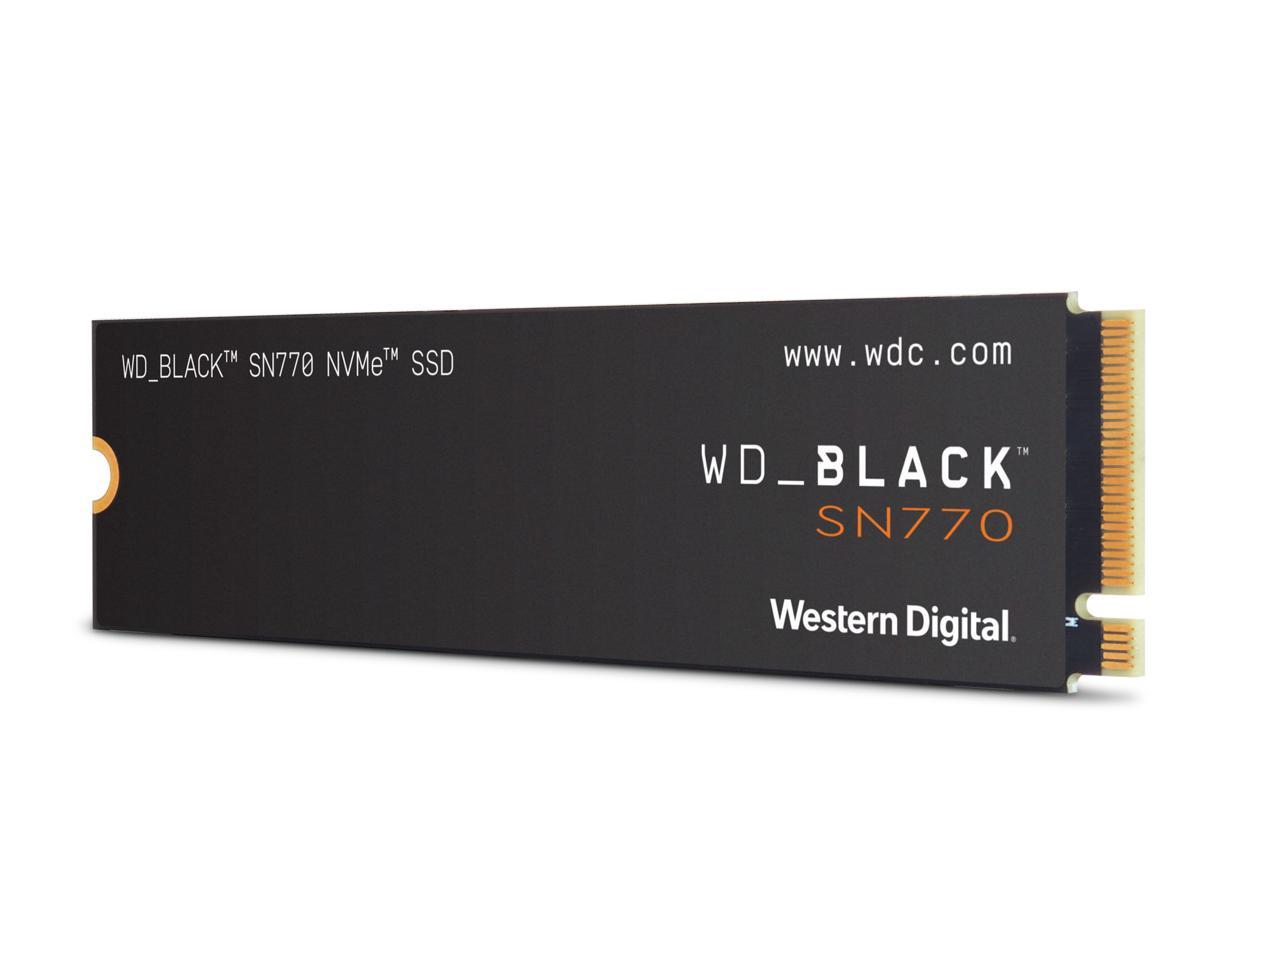 Western Digital WD_BLACK SN770 M.2 2280 500GB PCIe Gen4 16GT/s, up to 4 Lanes Internal Solid State Drive (SSD) WDS500G3X0E - image 1 of 20